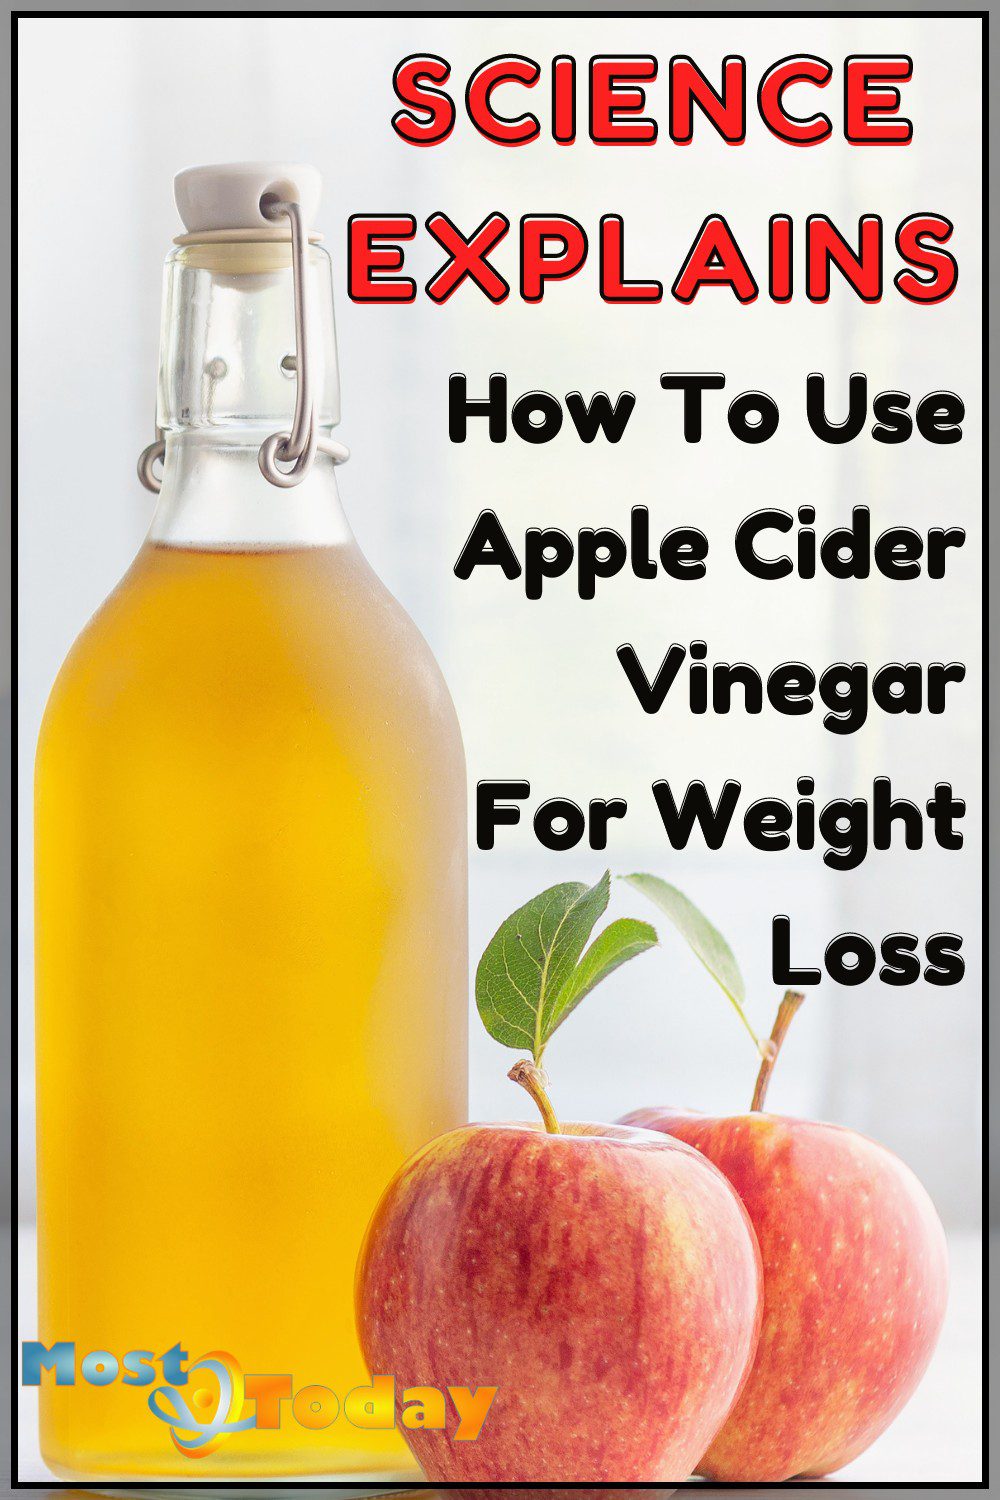 Science Explains How To Use Apple Cider Vinegar For Weight Loss